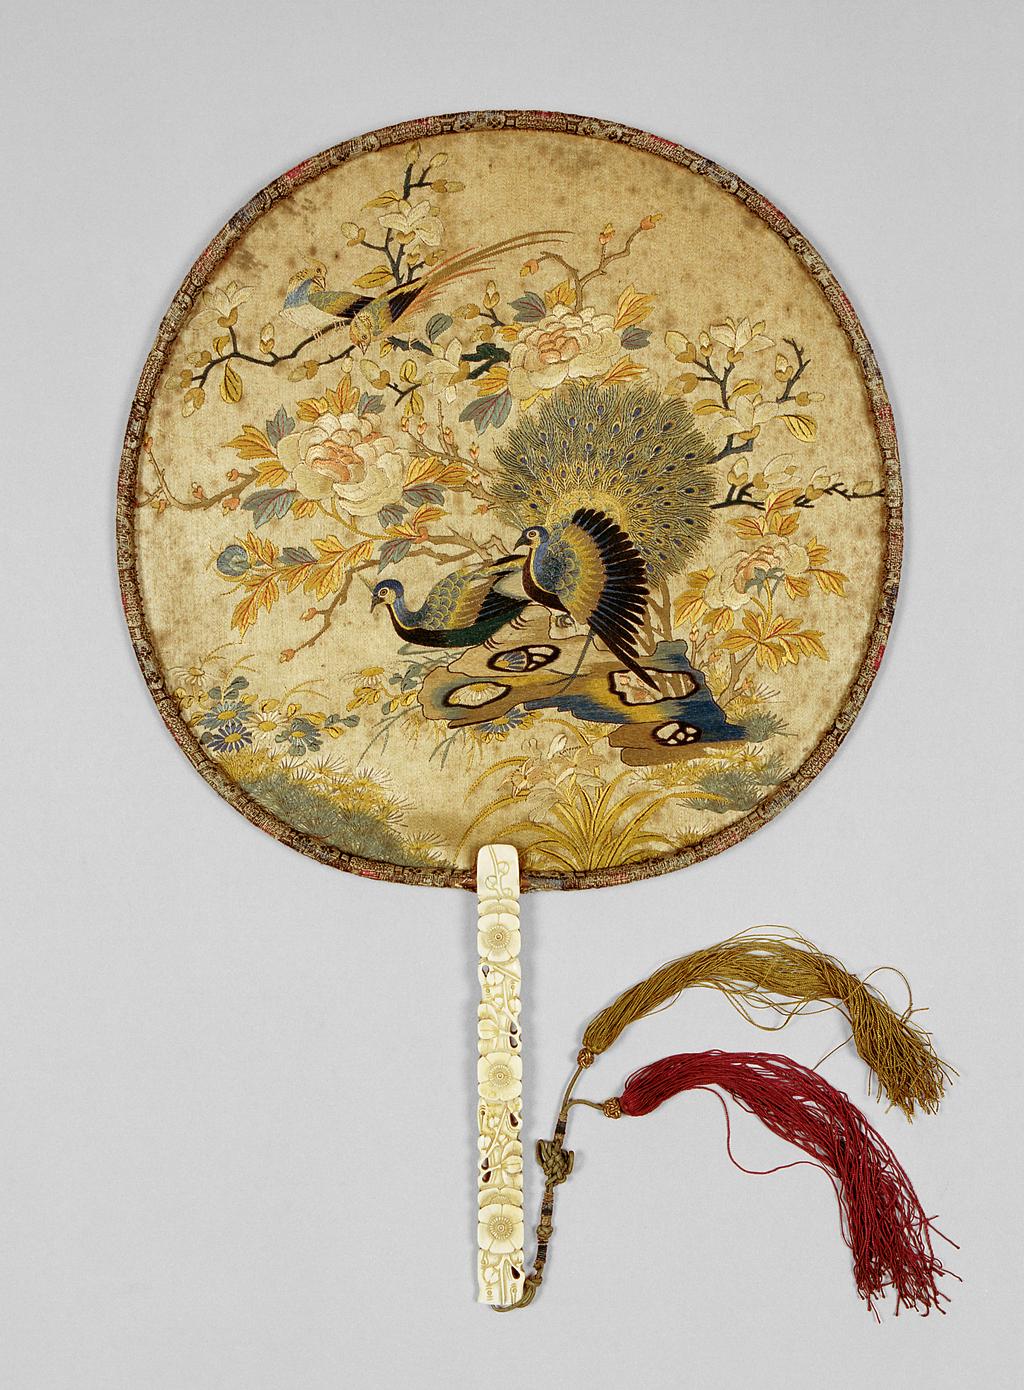 An image of Screen fan/pien mien. Unknown maker, China. Decorated with peacocks and orioles with flowering tree peonies, magnolias and rocks, the stick formed as flowering prunus. Stick: ivory carved in relief and pierced; knotted string of green silk bound in blue, with red and gold tassels, with sliding gilt paper-wrapped toggles. Rim: brocade covered. Face: polychrome silk embroidered on satin. Height, guards, 40.3 cm, width, whole, 26.6 cm, after 1770 to before 1830. Collection: Messel-Rosse Collection.